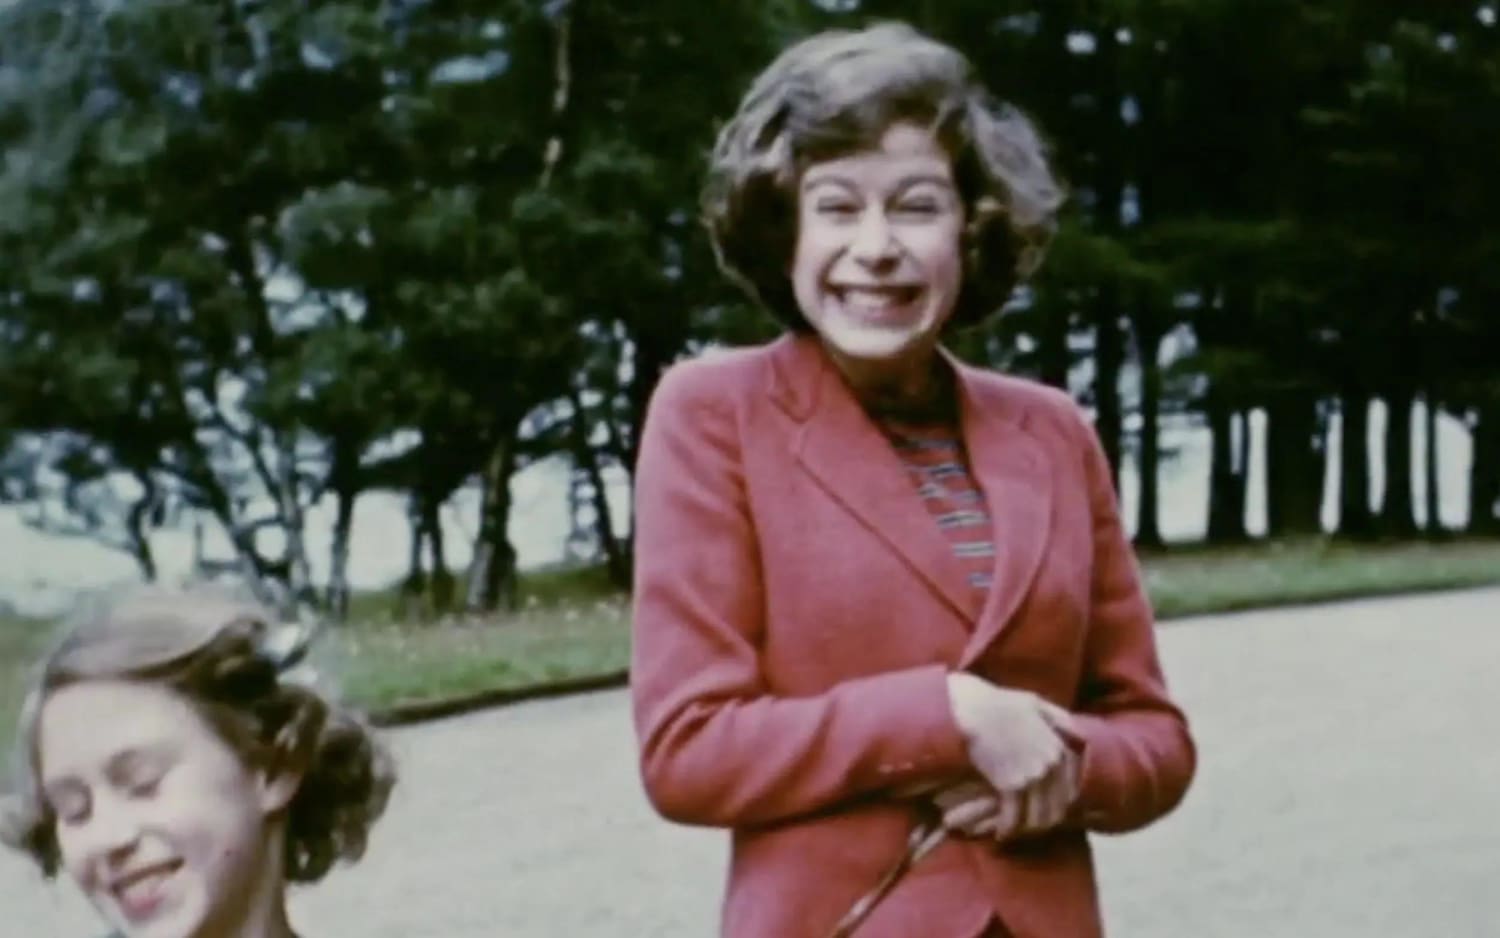 Fun behind the formalities: Princess Elizabeth gives the camera the biggest smile she could muster in a still image from a home video. Princess Margaret playfully curtsies almost out of frame.